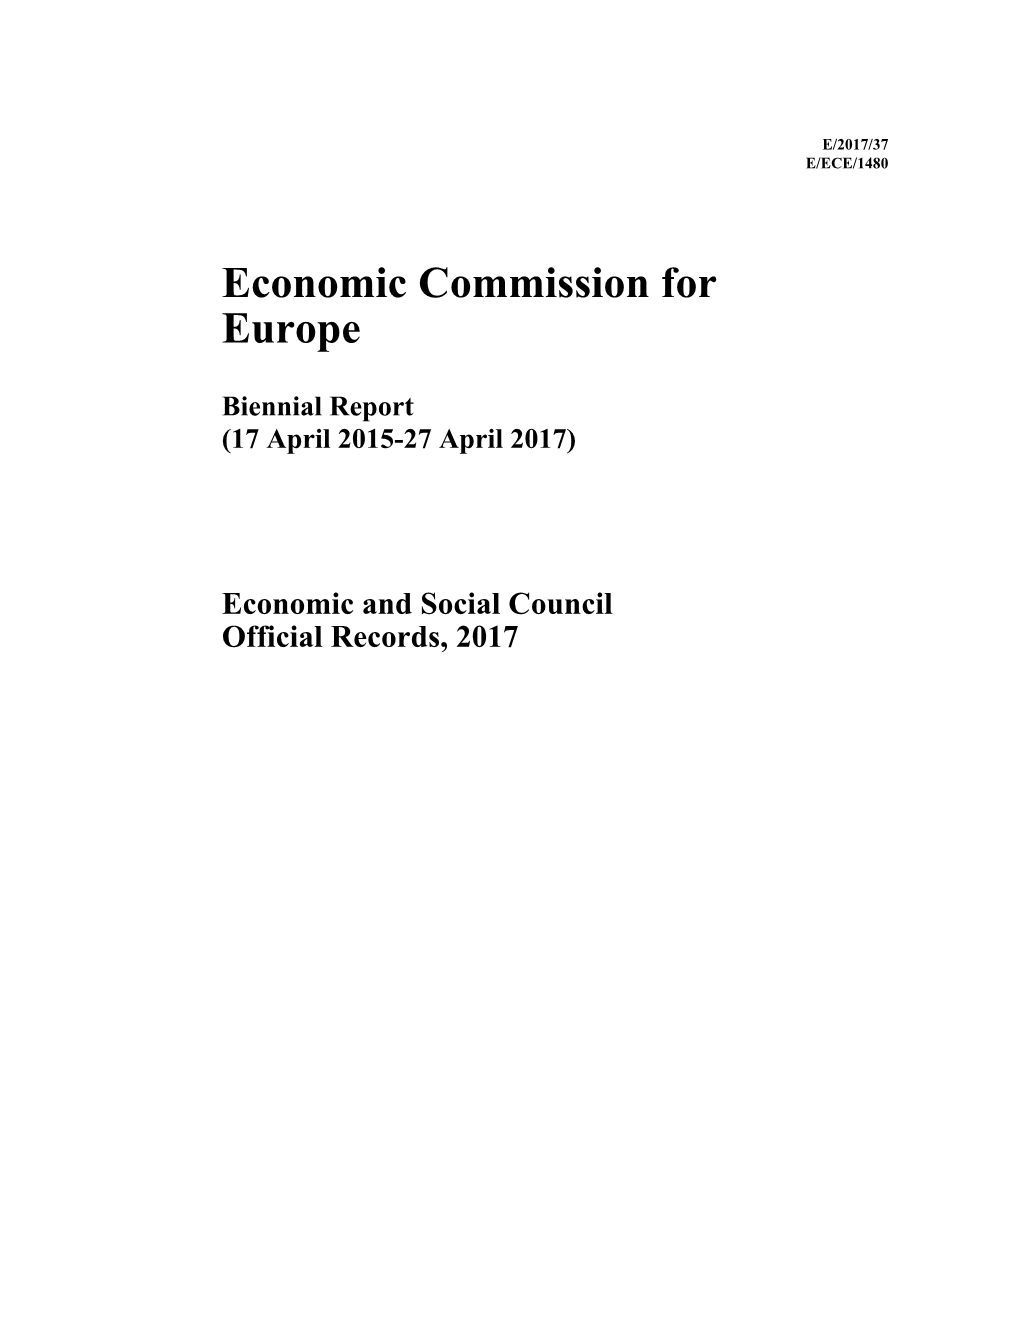 Economic Commission for Europe